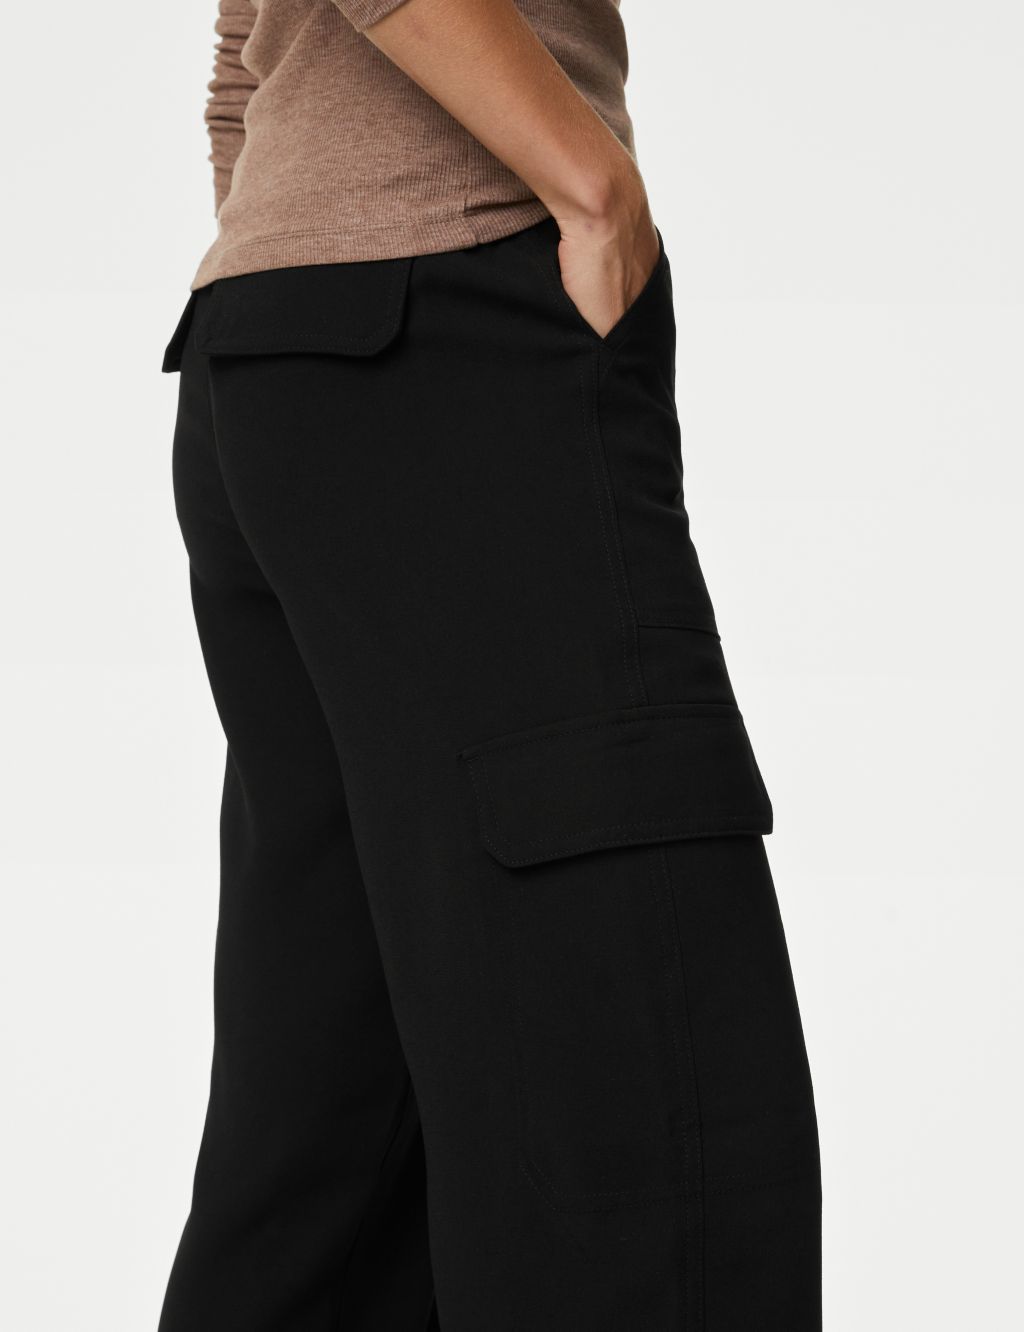 Crepe Cargo Relaxed Trousers image 3